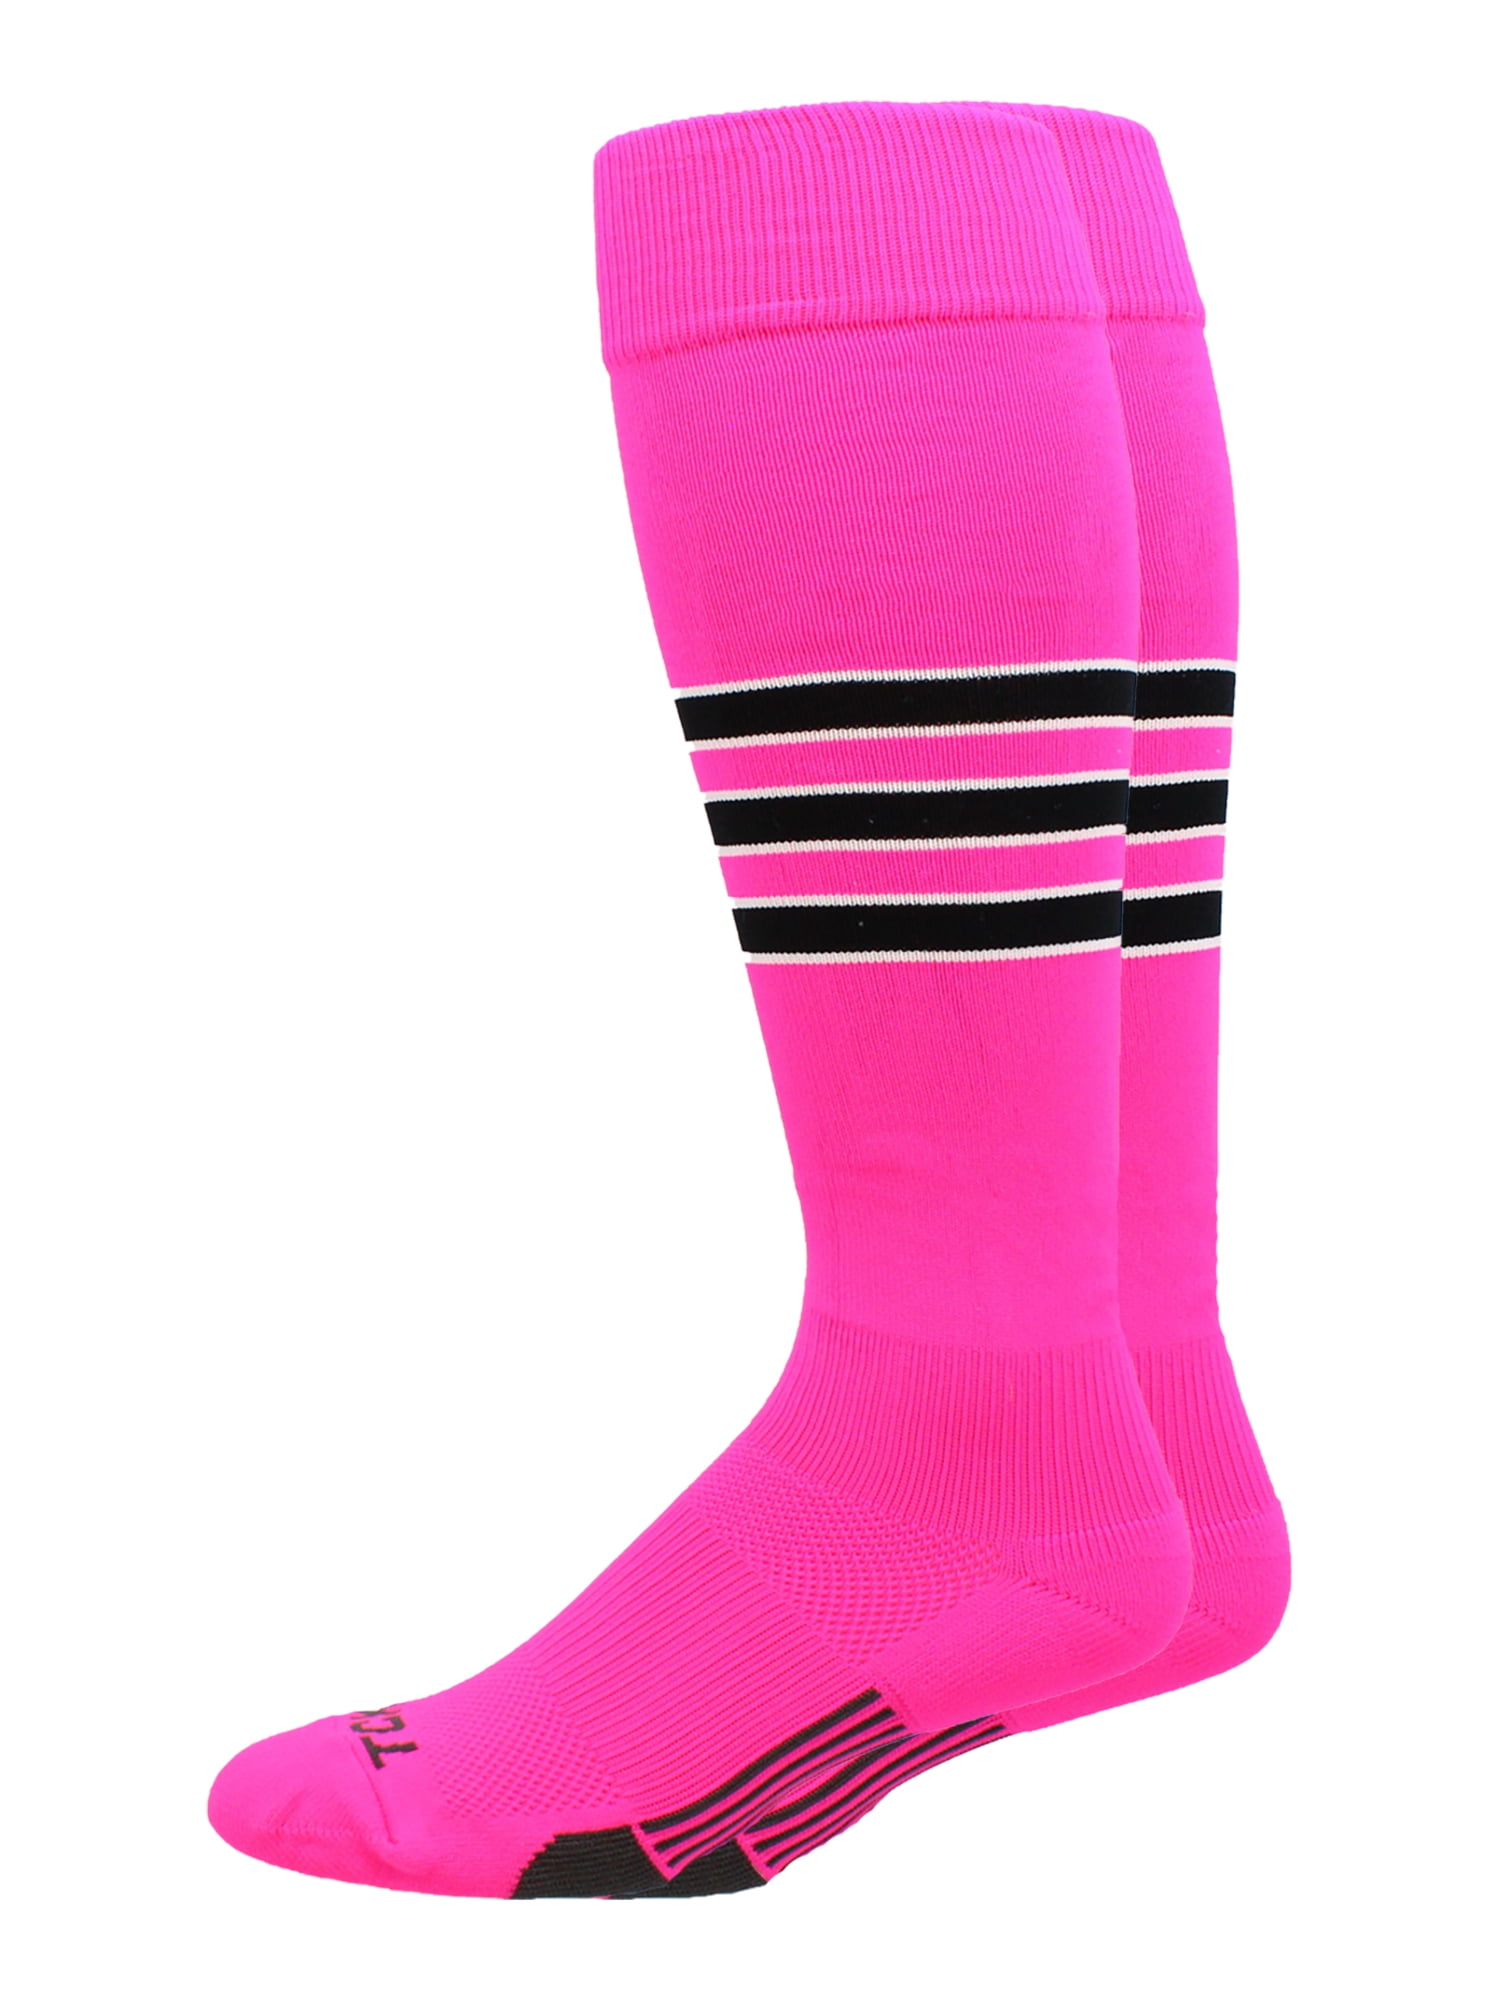 NWT Hot Pink Multi-sport All In One Sock Small Soccer Softball Baseball One Pair 